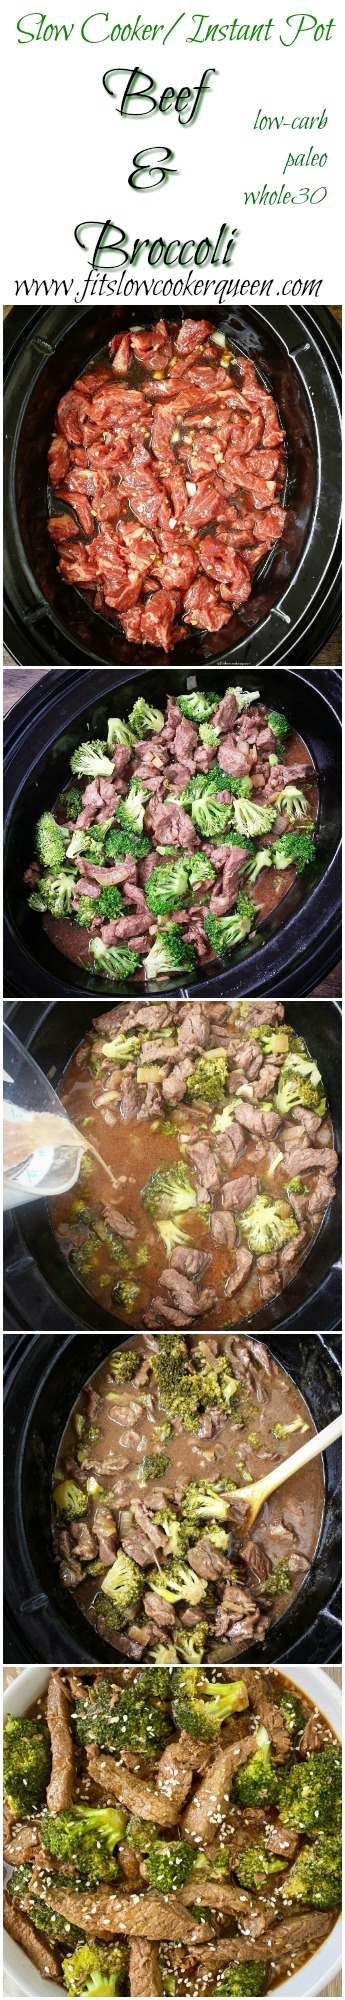 another pinterest pin for Slow Cooker_Instant Pot Beef & Broccoli (Low-Carb, Paleo, Whole30)